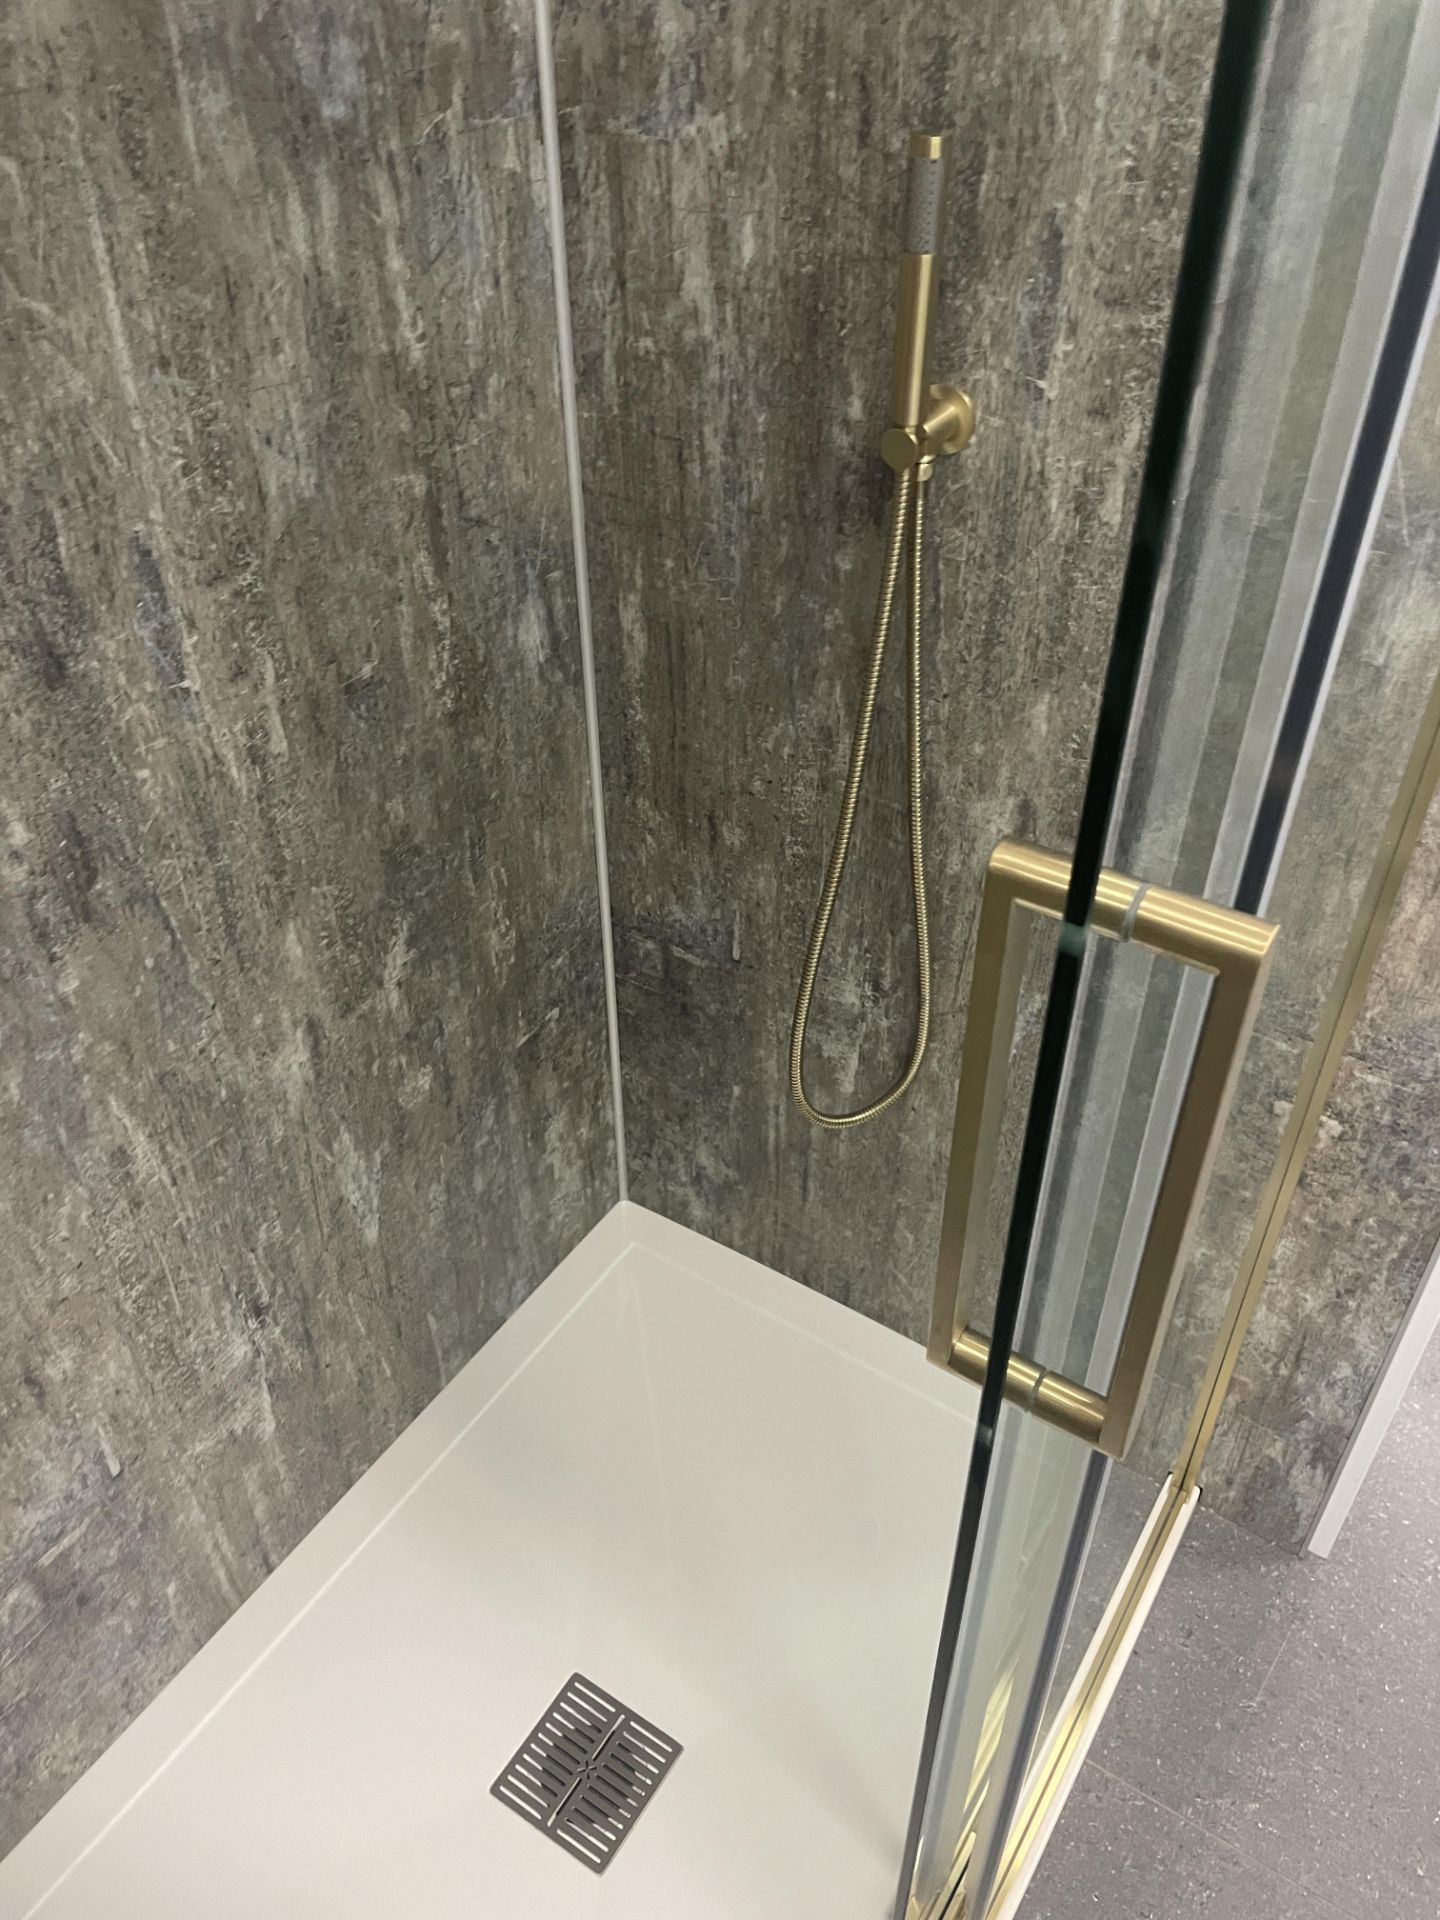 Crosswater Optix 10 Sliding Door Enclosed Shower, with showerhead and mixer taps, approx. 1200mm x - Image 4 of 4